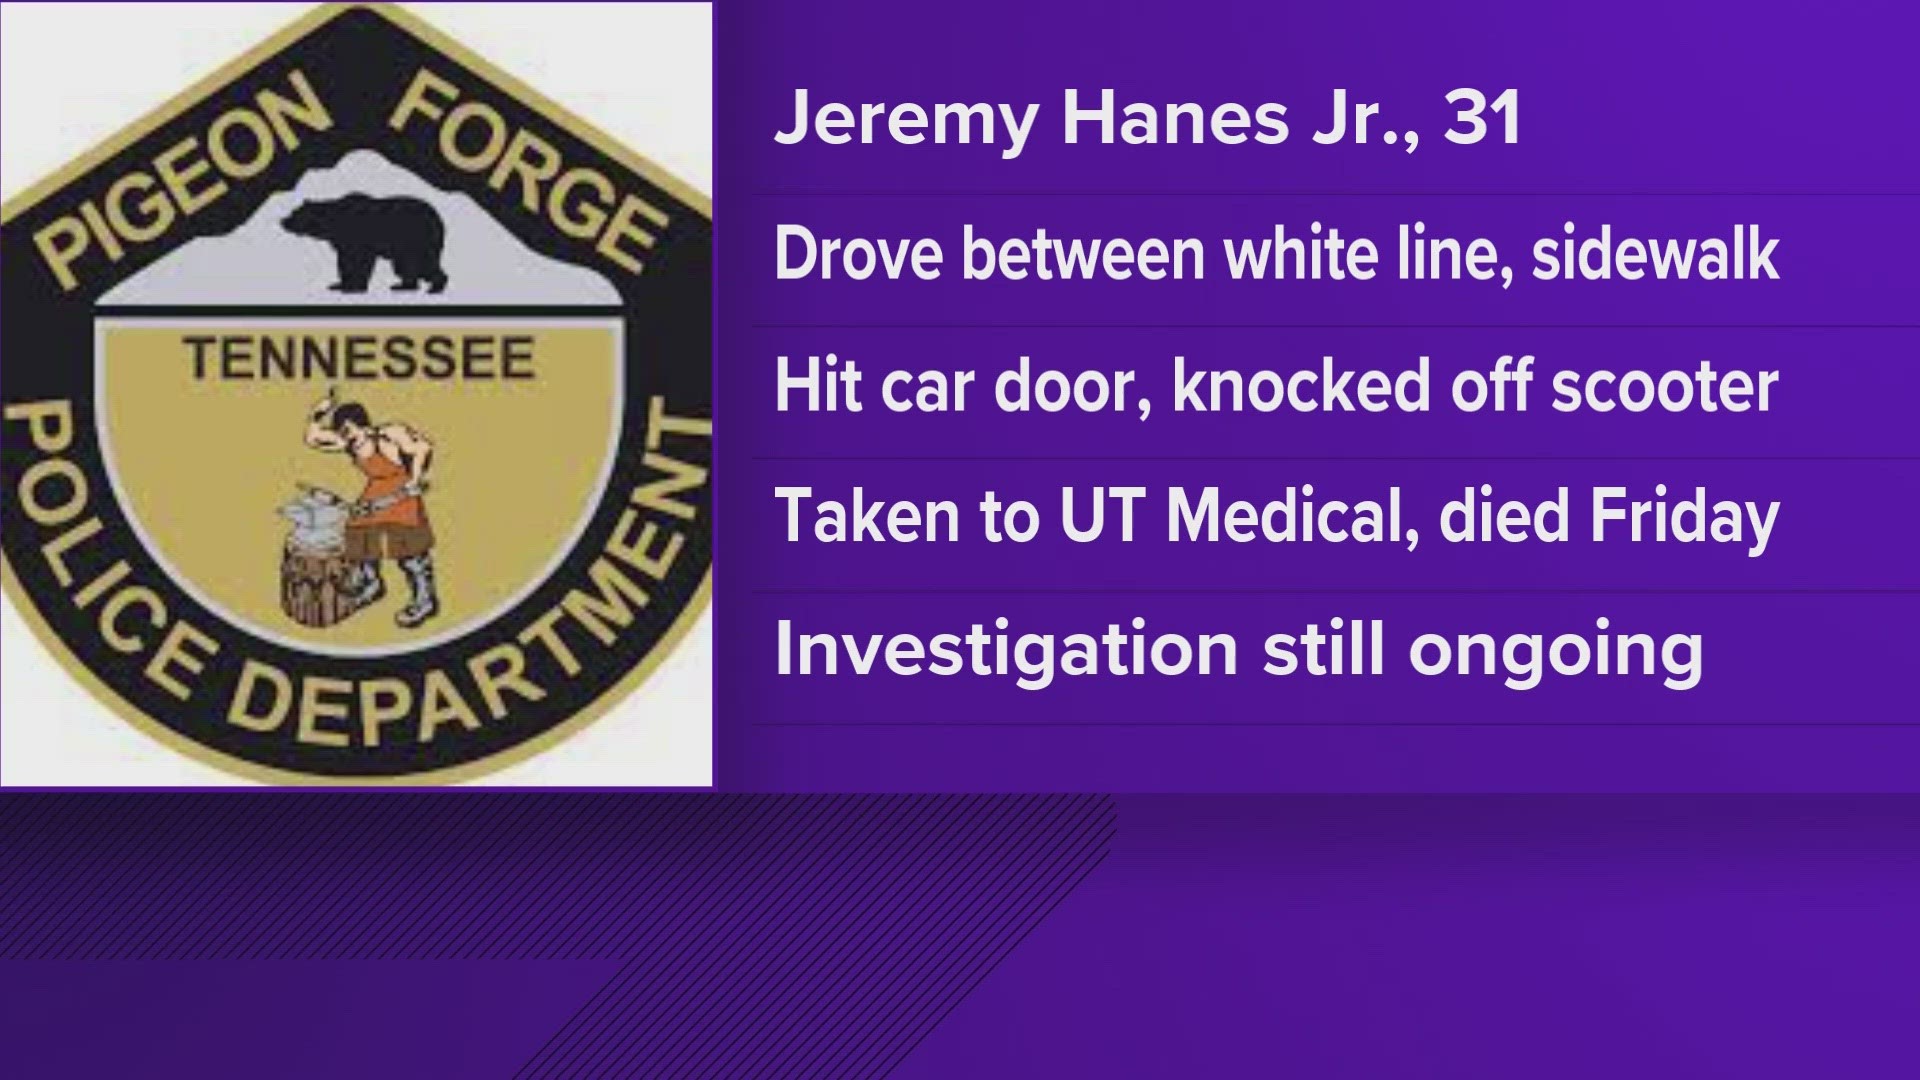 PFPD said Jeremy Hanes Jr. was driving on an electric scooter when he crashed into a truck's opened passenger door at a red light.